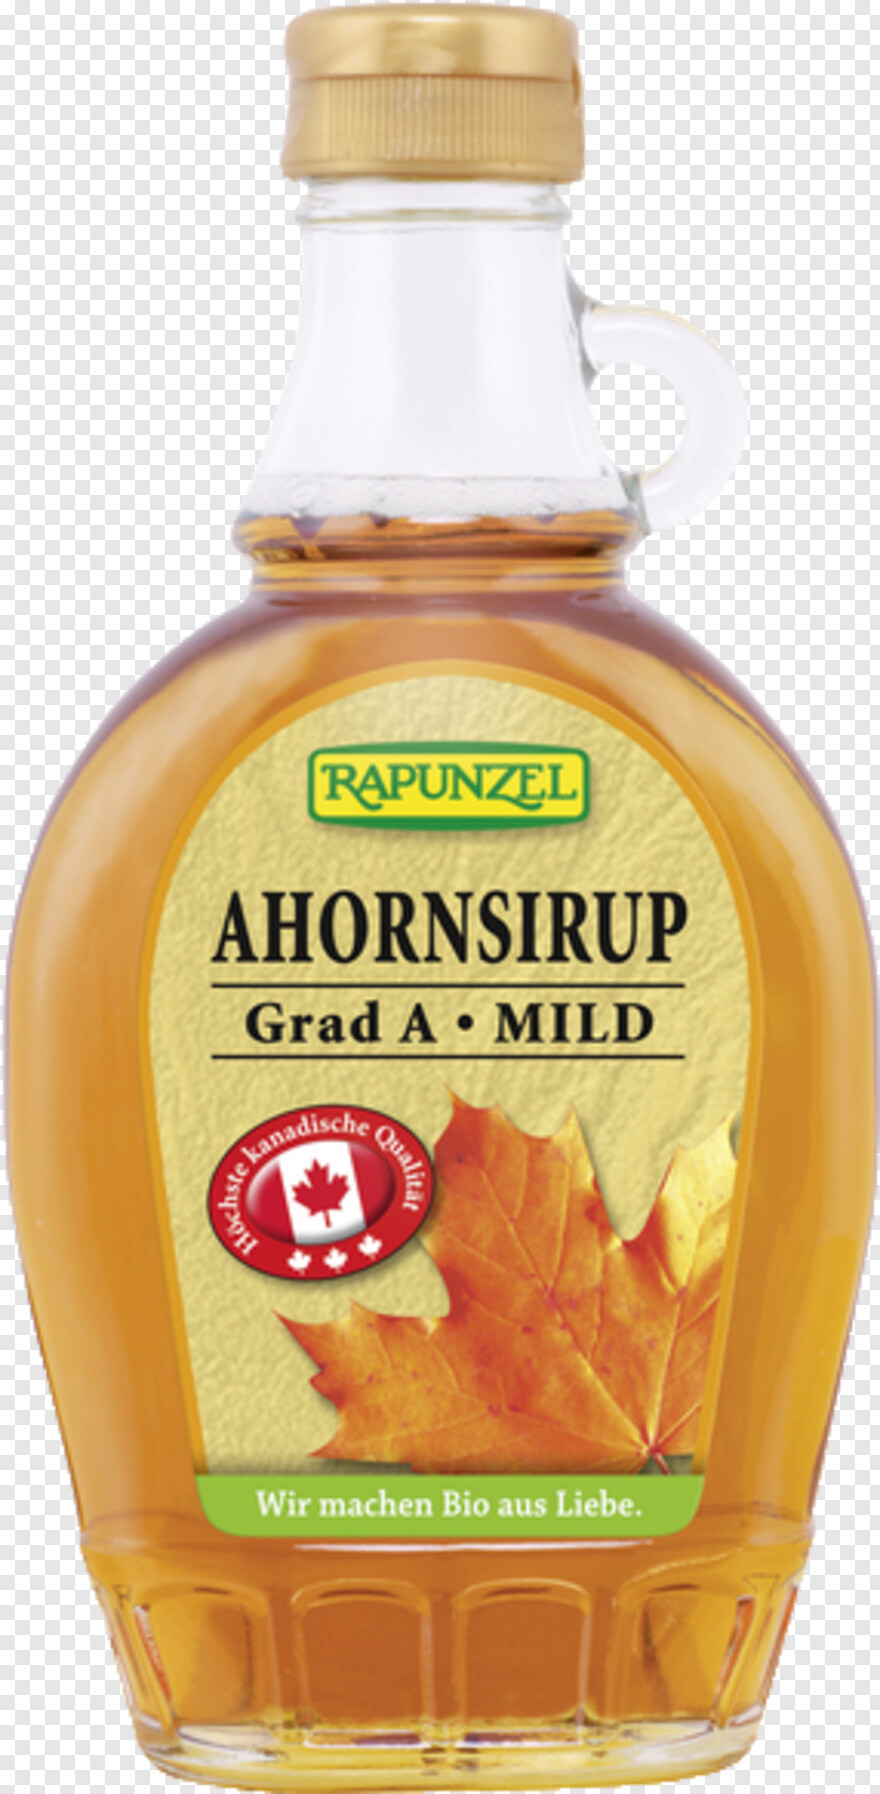 syrup # 787644